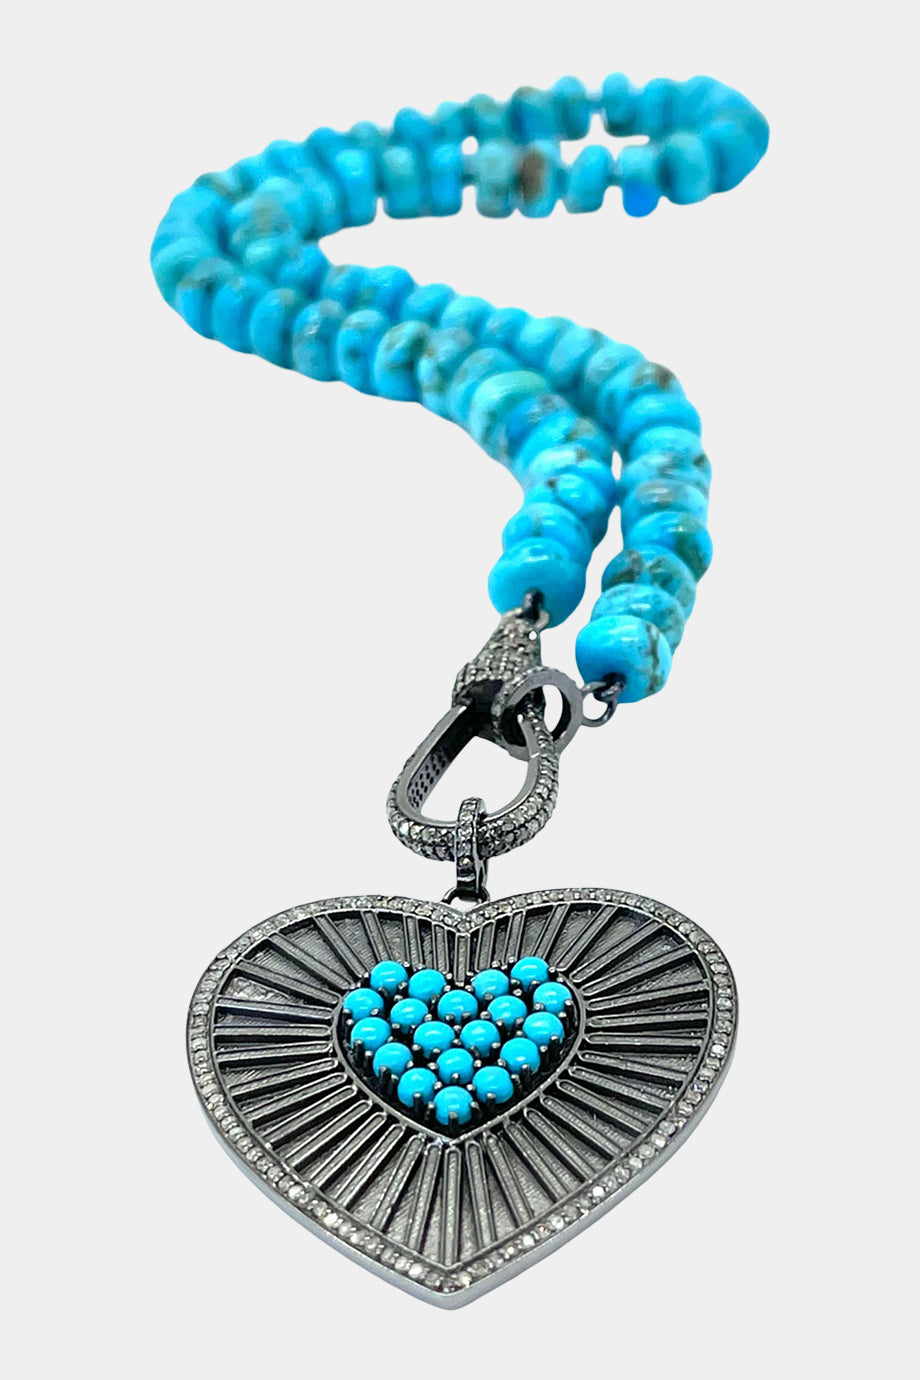 Turquoise Knotted Necklace with Heart Pendant